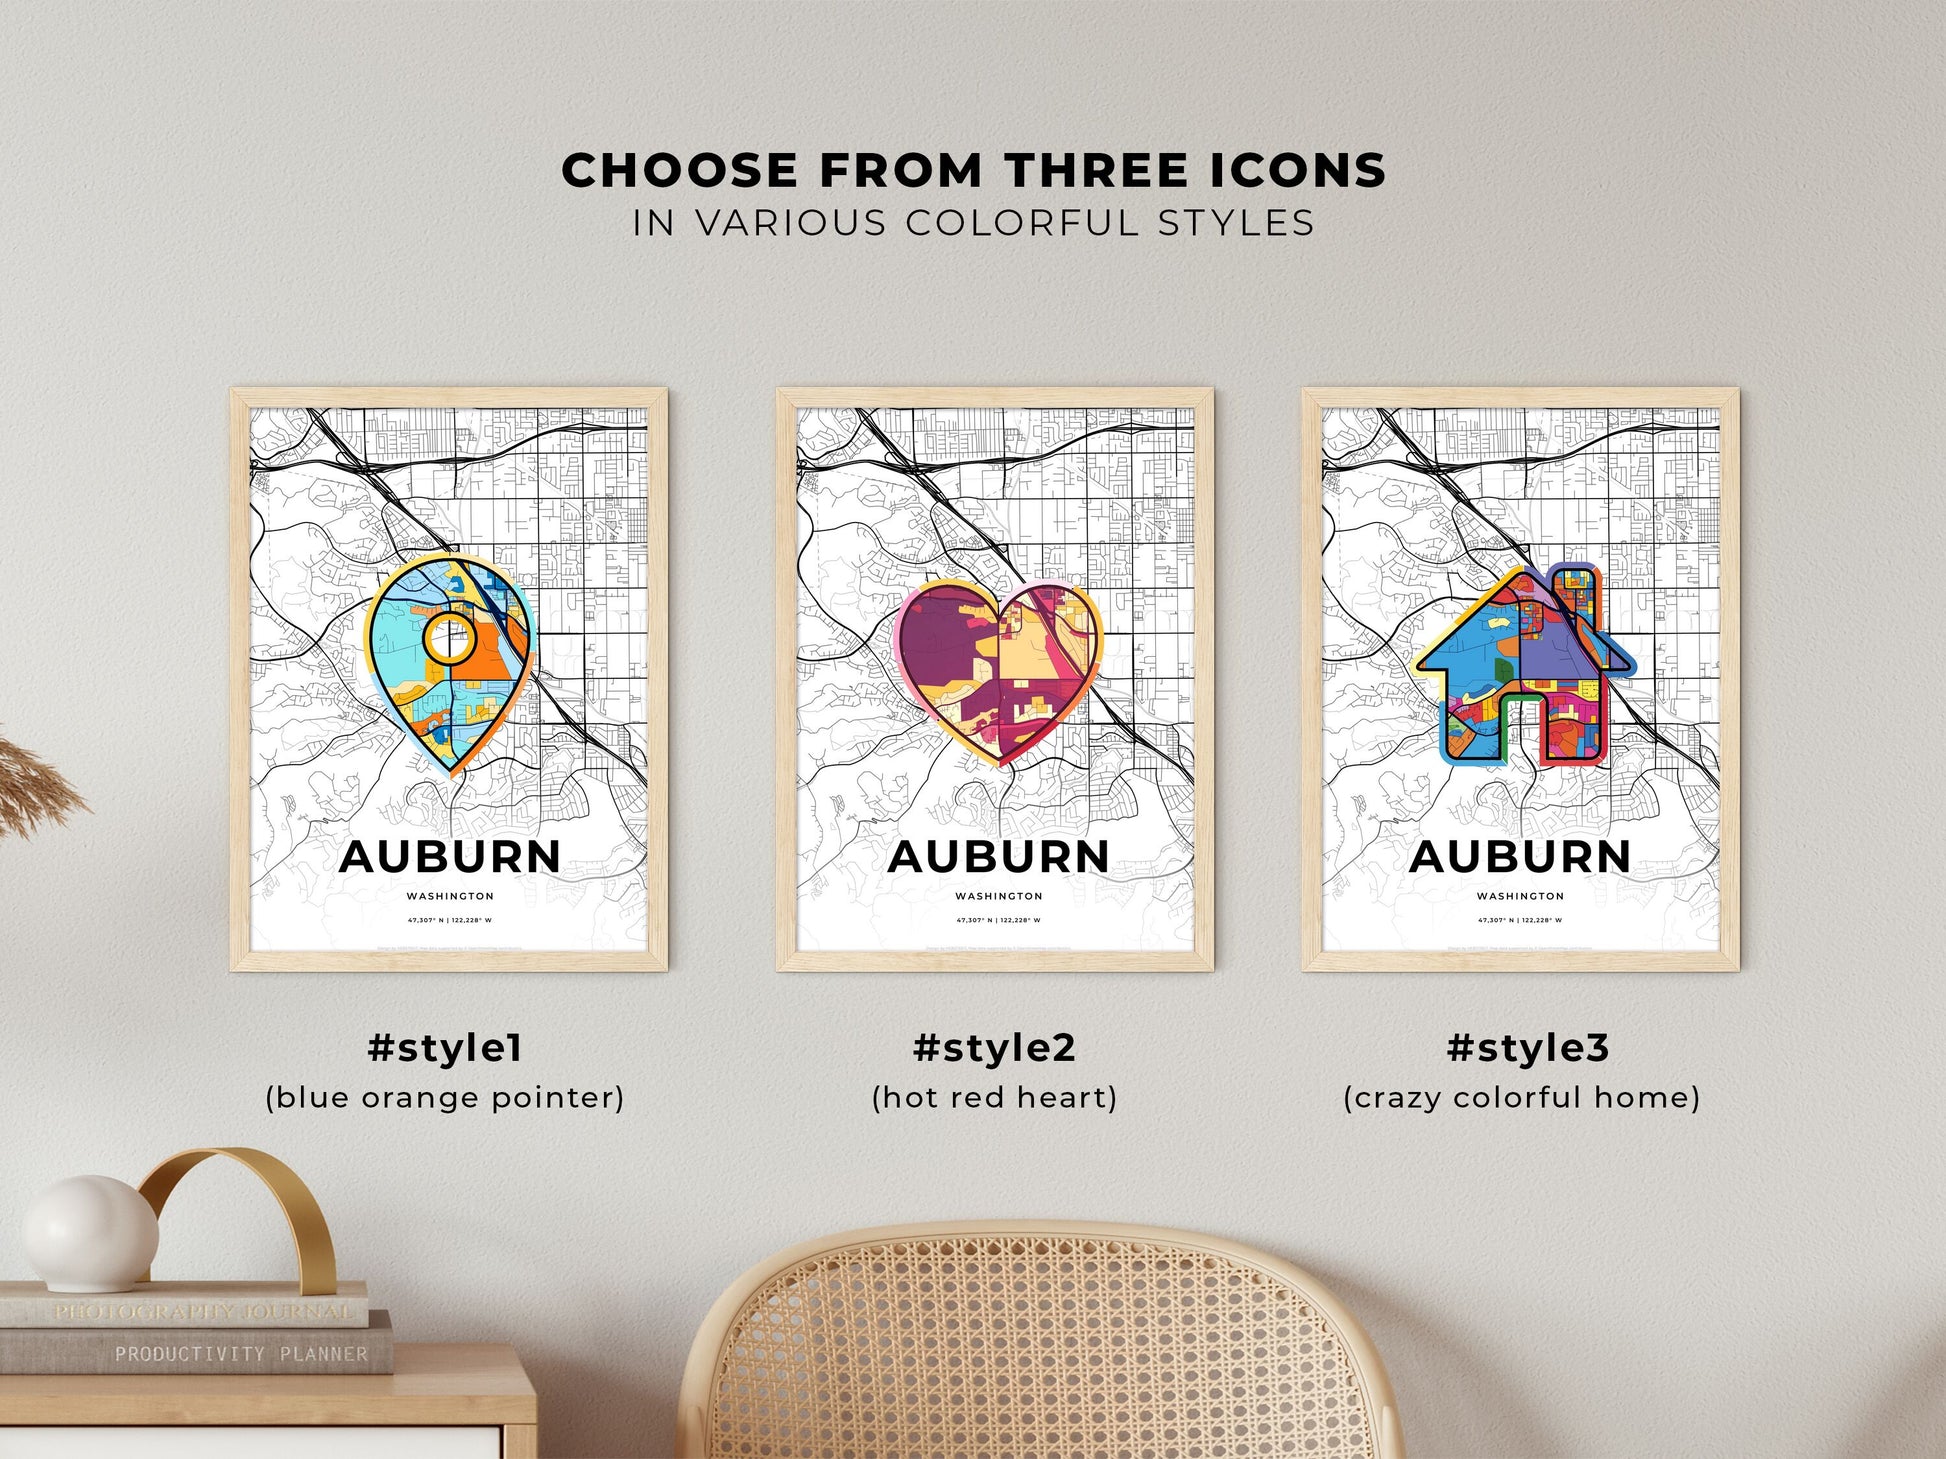 AUBURN WASHINGTON minimal art map with a colorful icon. Where it all began, Couple map gift.